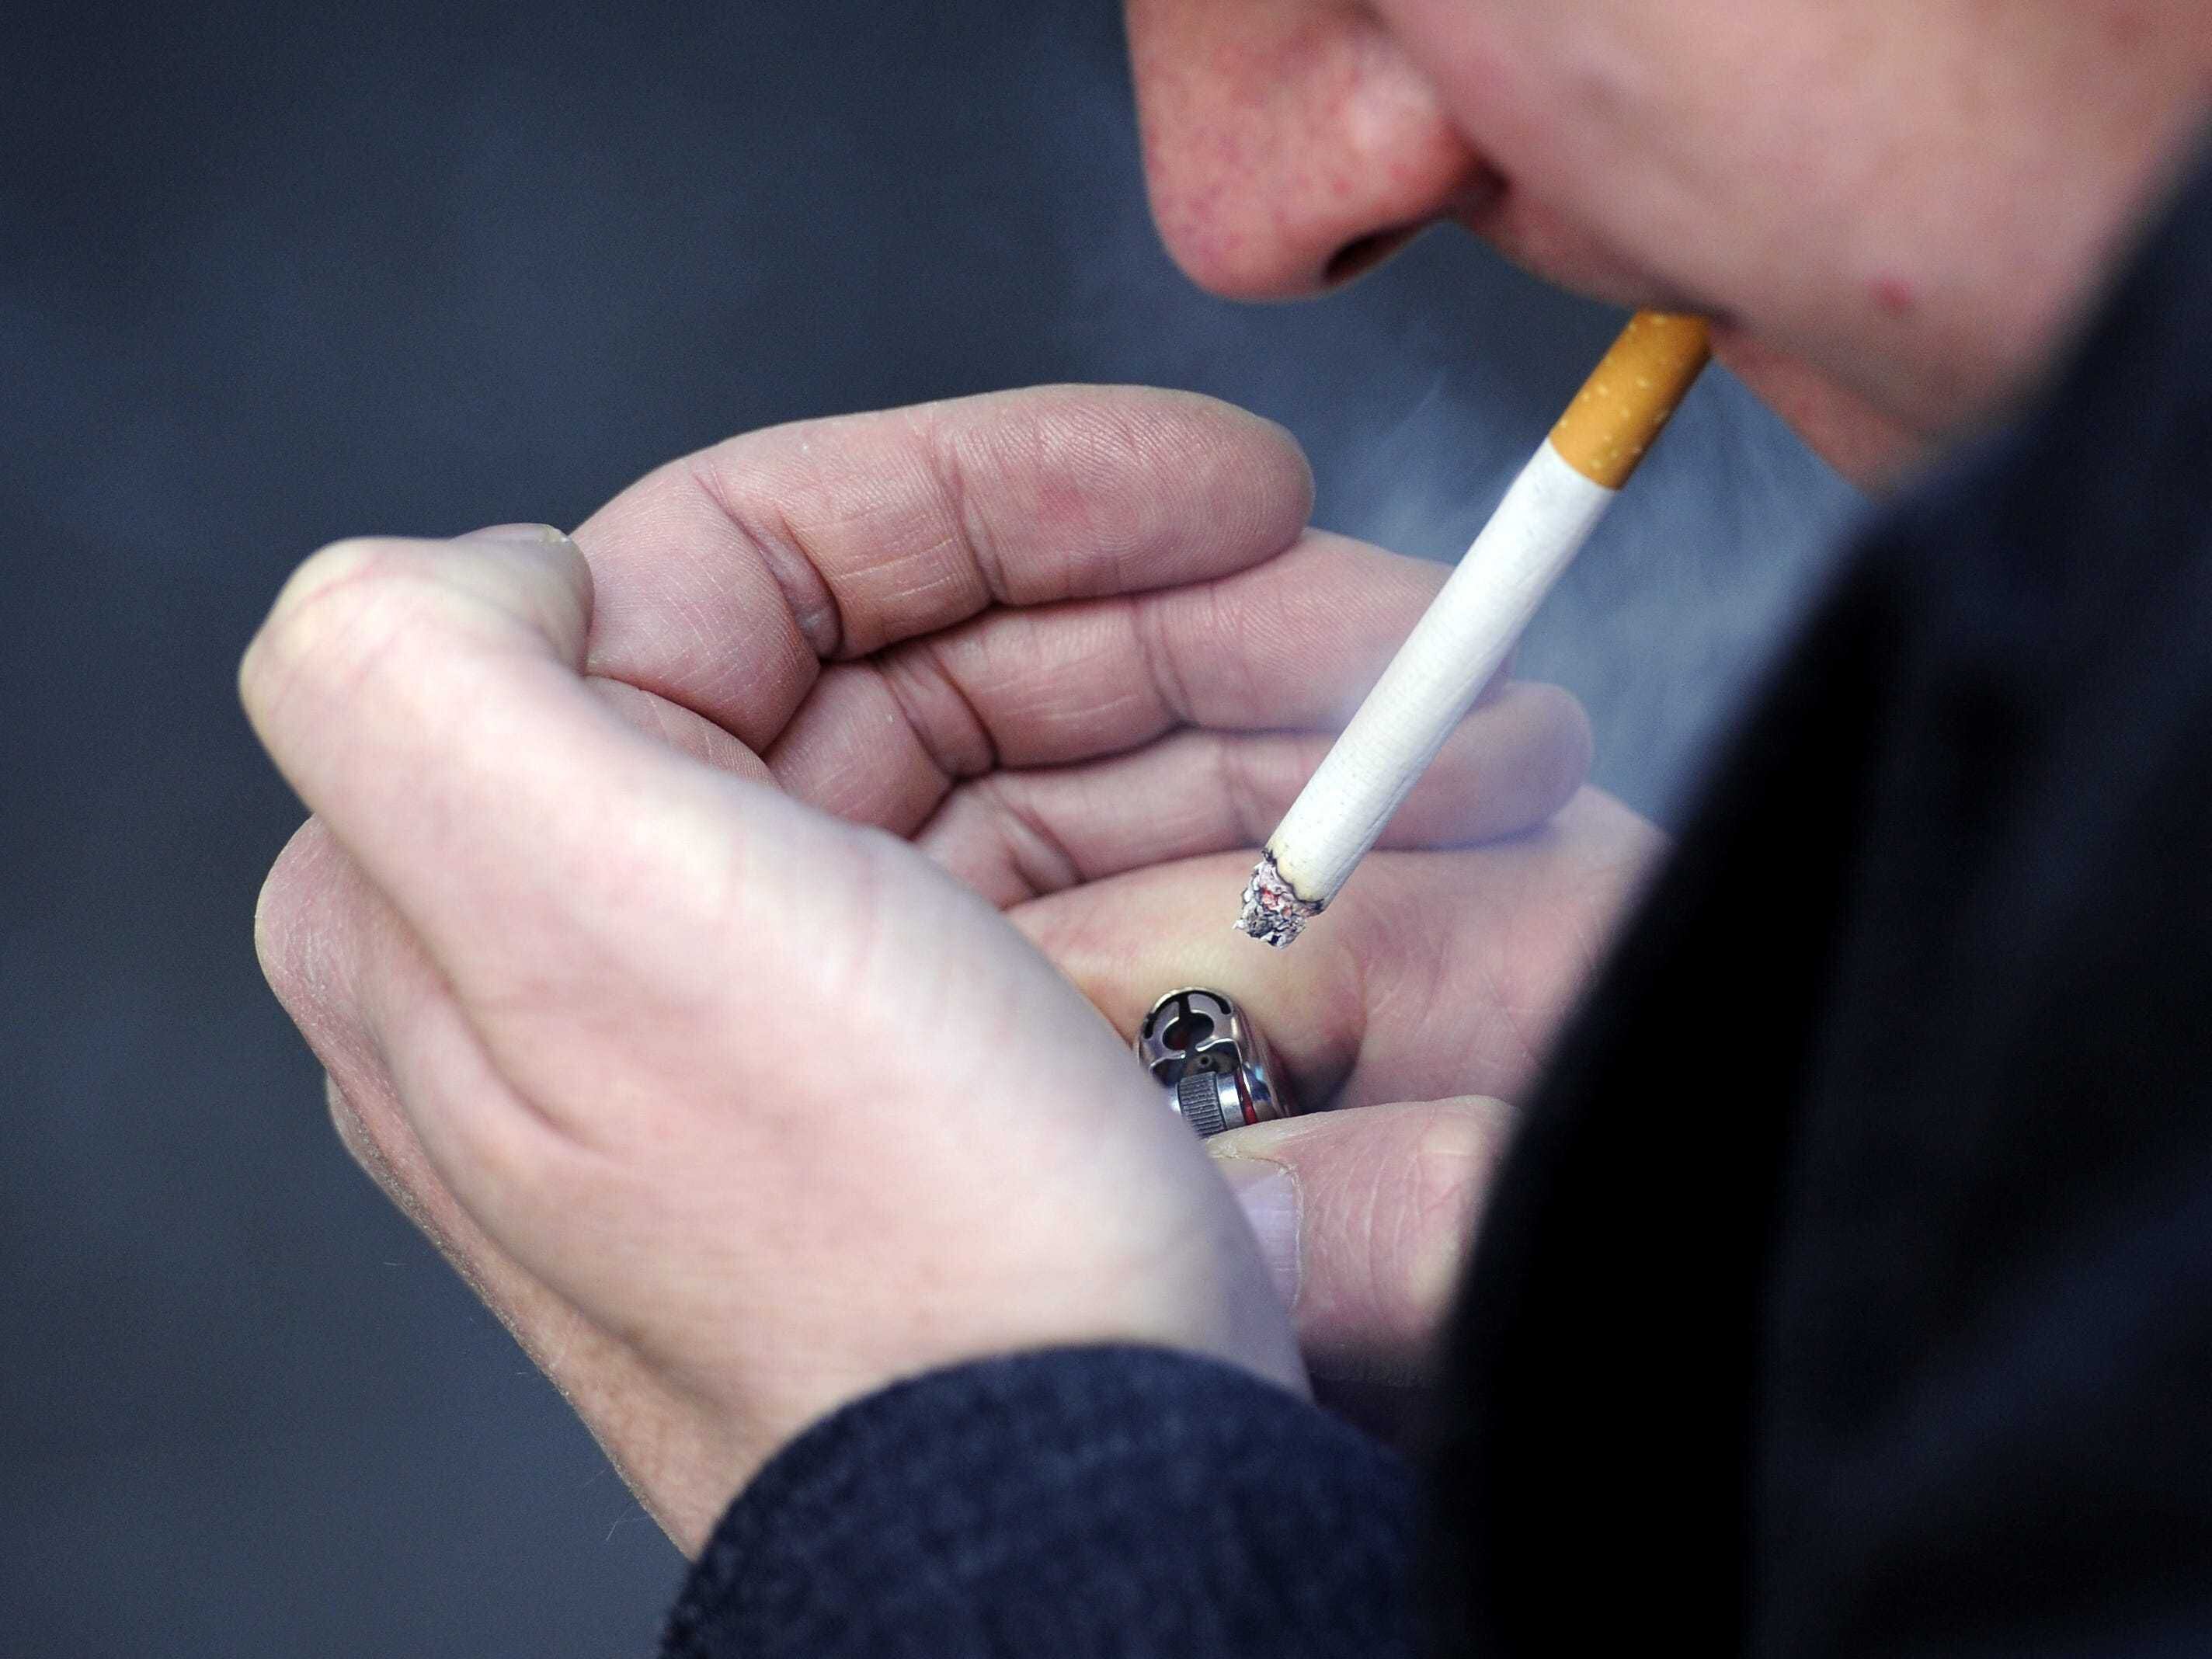  Cancers caused by smoking reach UK high of 160 new cases per day